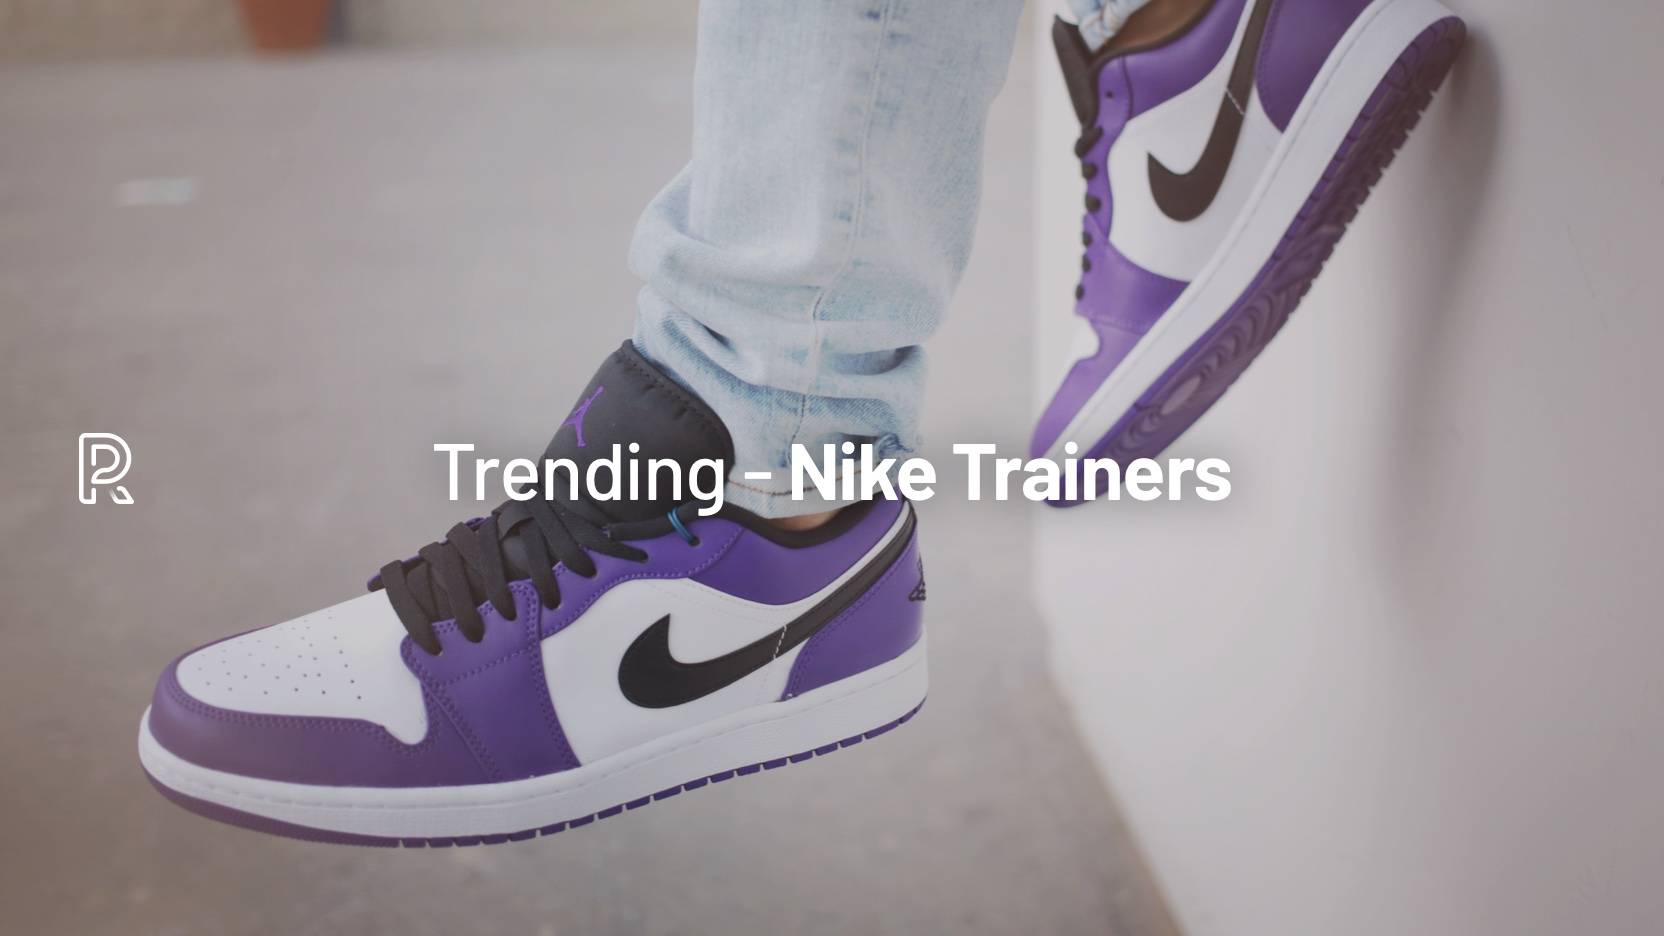 Most Popular Nike Trainers of